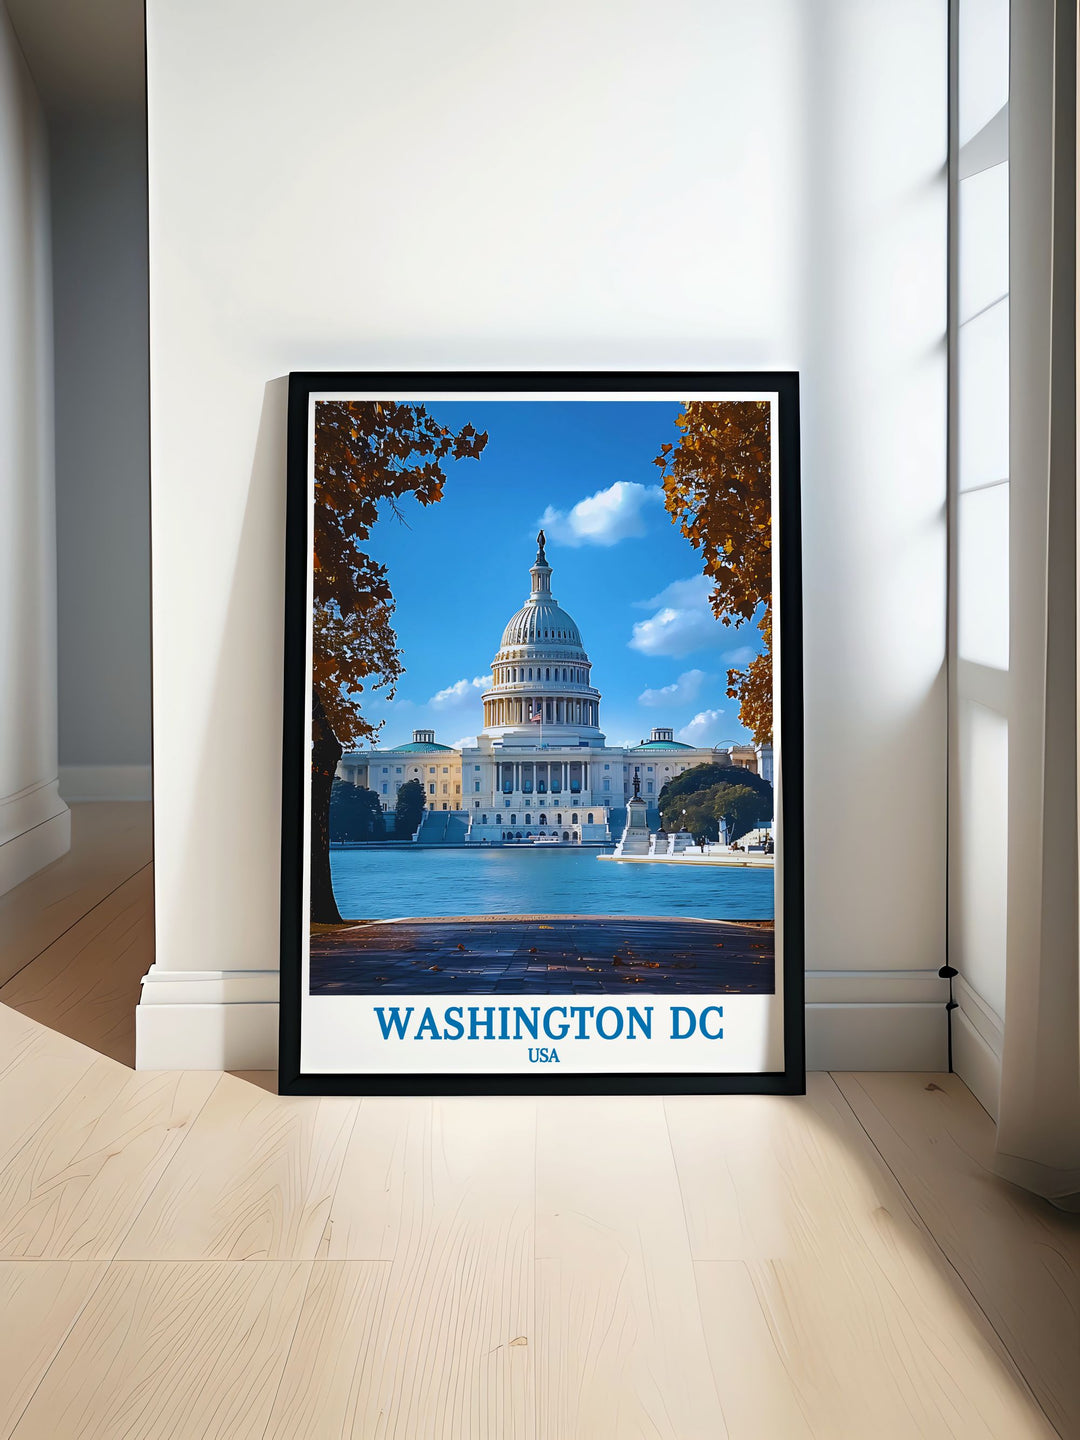 Washington DC print featuring The United States Capitol Building in a detailed black and white fine line style perfect for home decor and gifting occasions like birthdays anniversaries and holidays